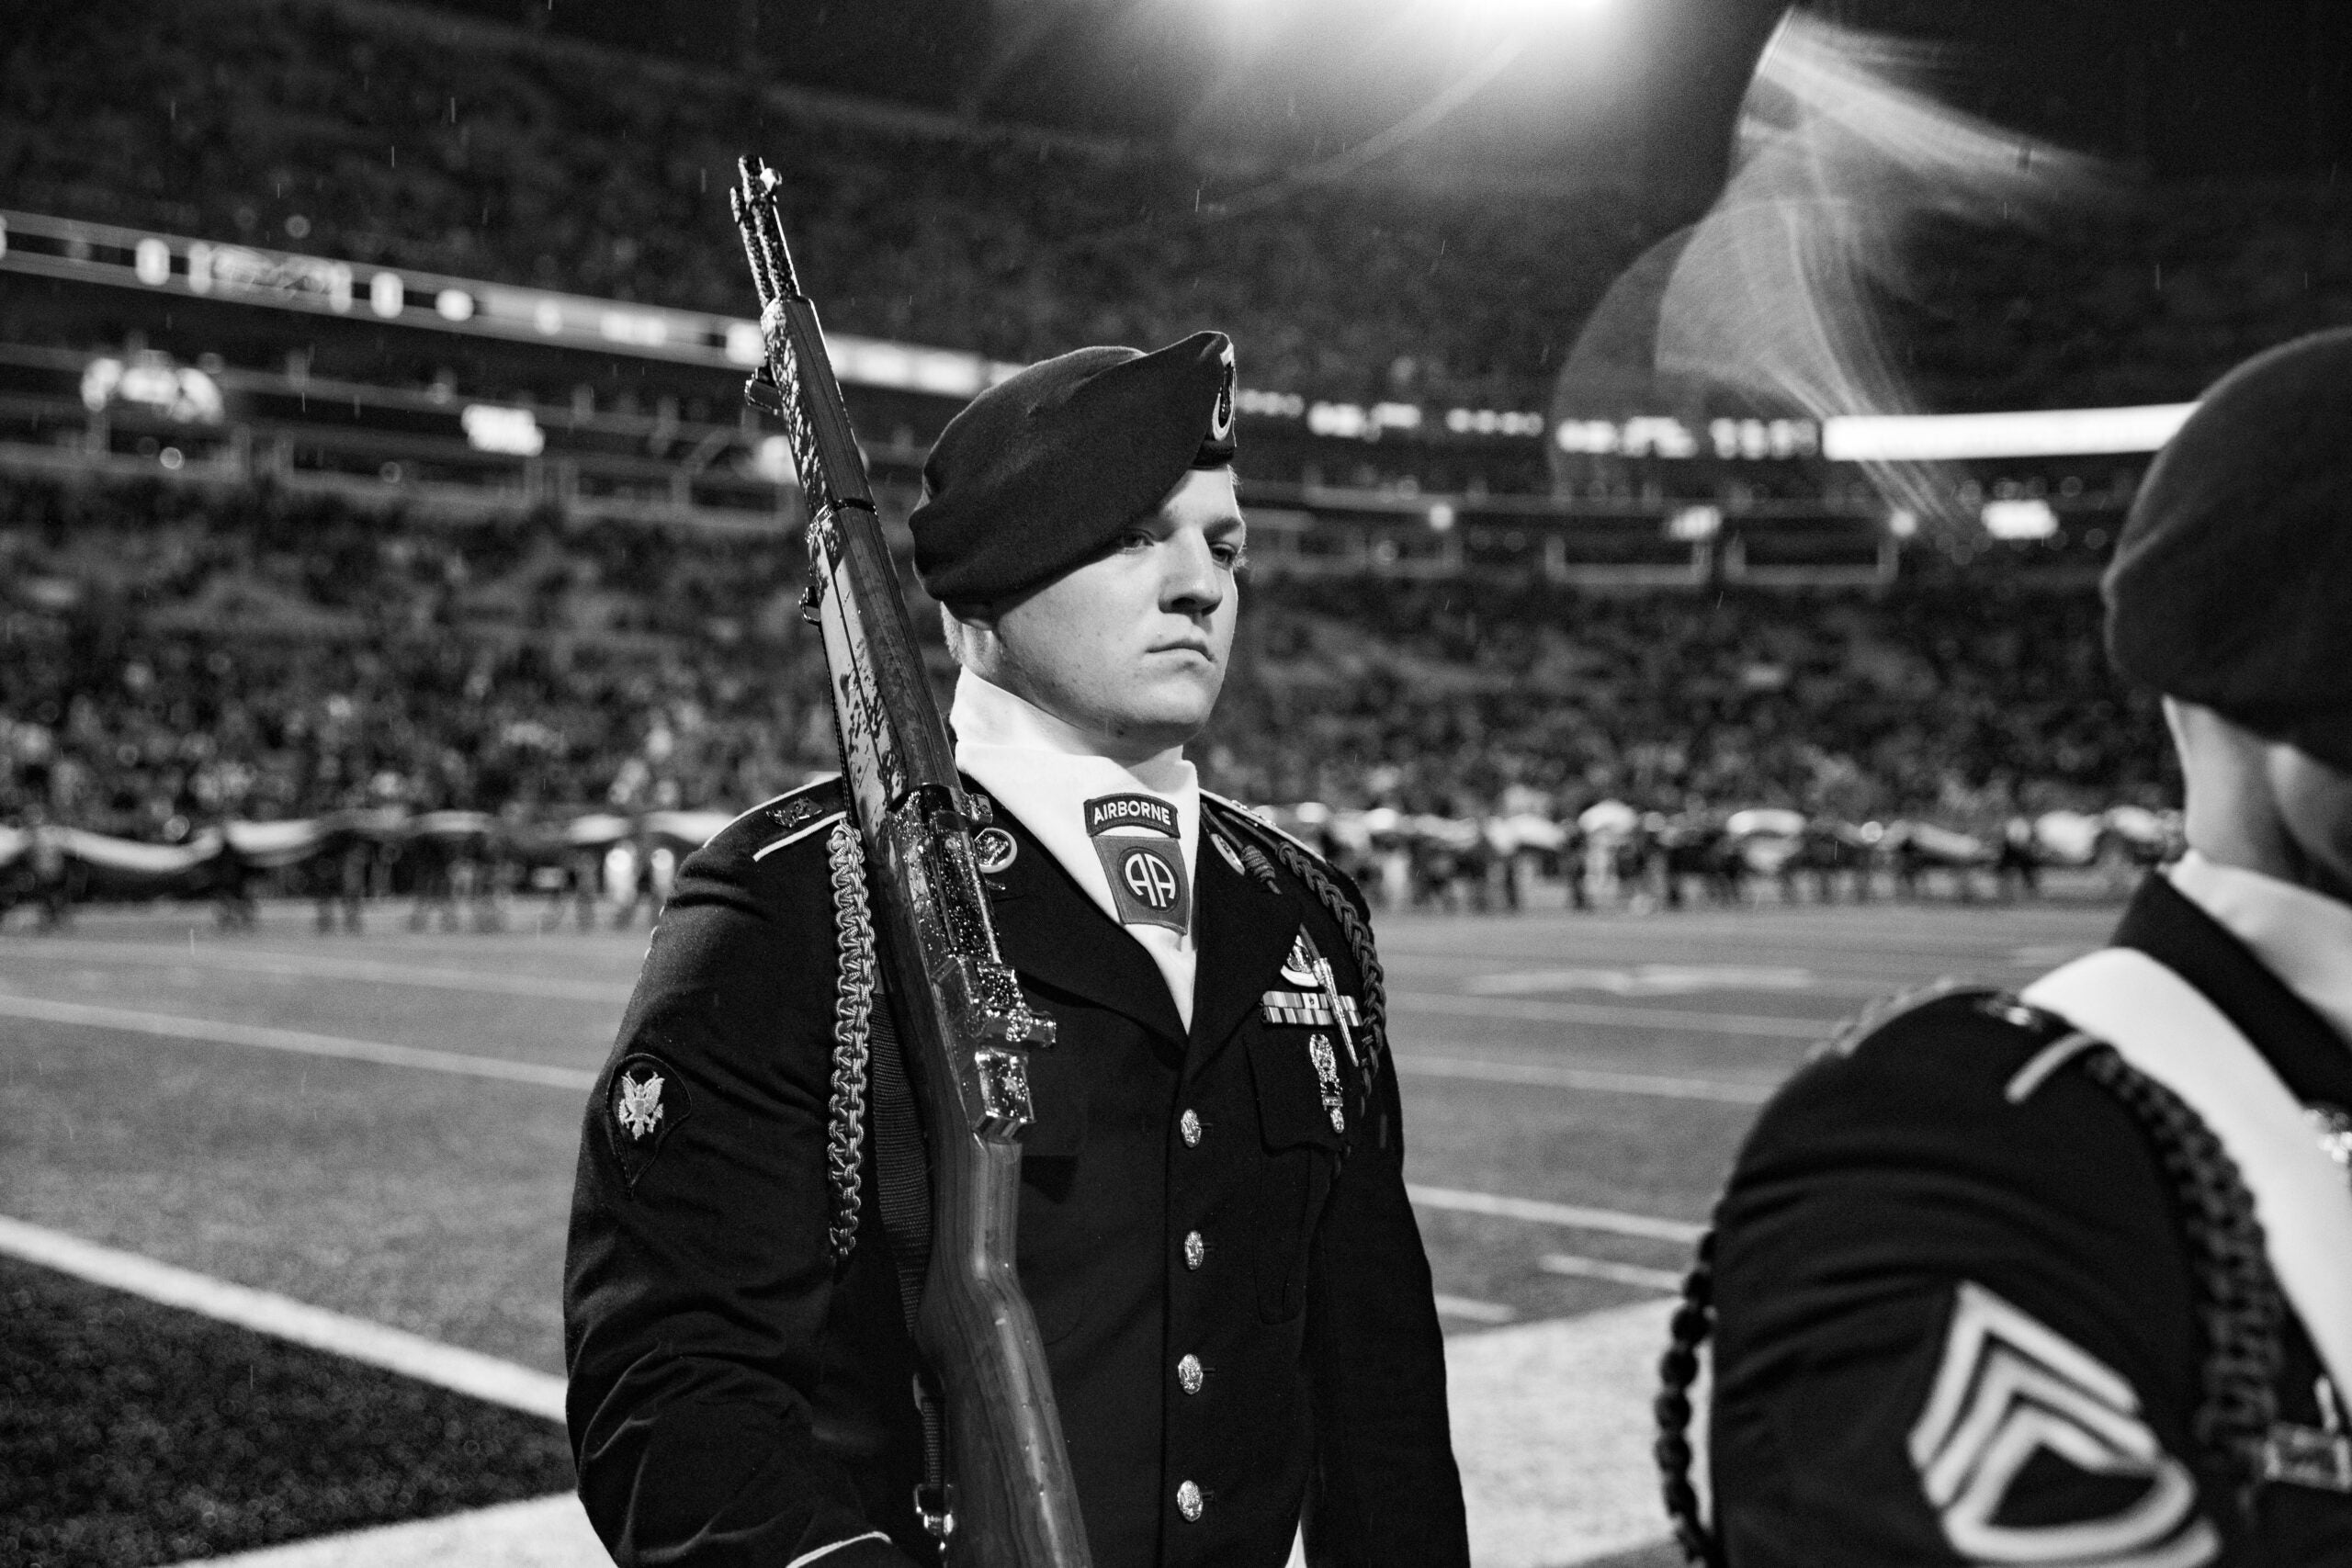 The 82nd Airborne Division's Color Guard and All American Chorus performs before the Carolina Panthers vs. Atlanta Falcons game at Bank of America Stadium in Charlotte, N.C., Nov 10, 2022. The 82nd Airborne Division Chaplain Lt. Col. Erik T. Spicer also provided the opening ceremony invocation. #AATW (U.S. Army photo by Sgt. Emely Opio-Wright)